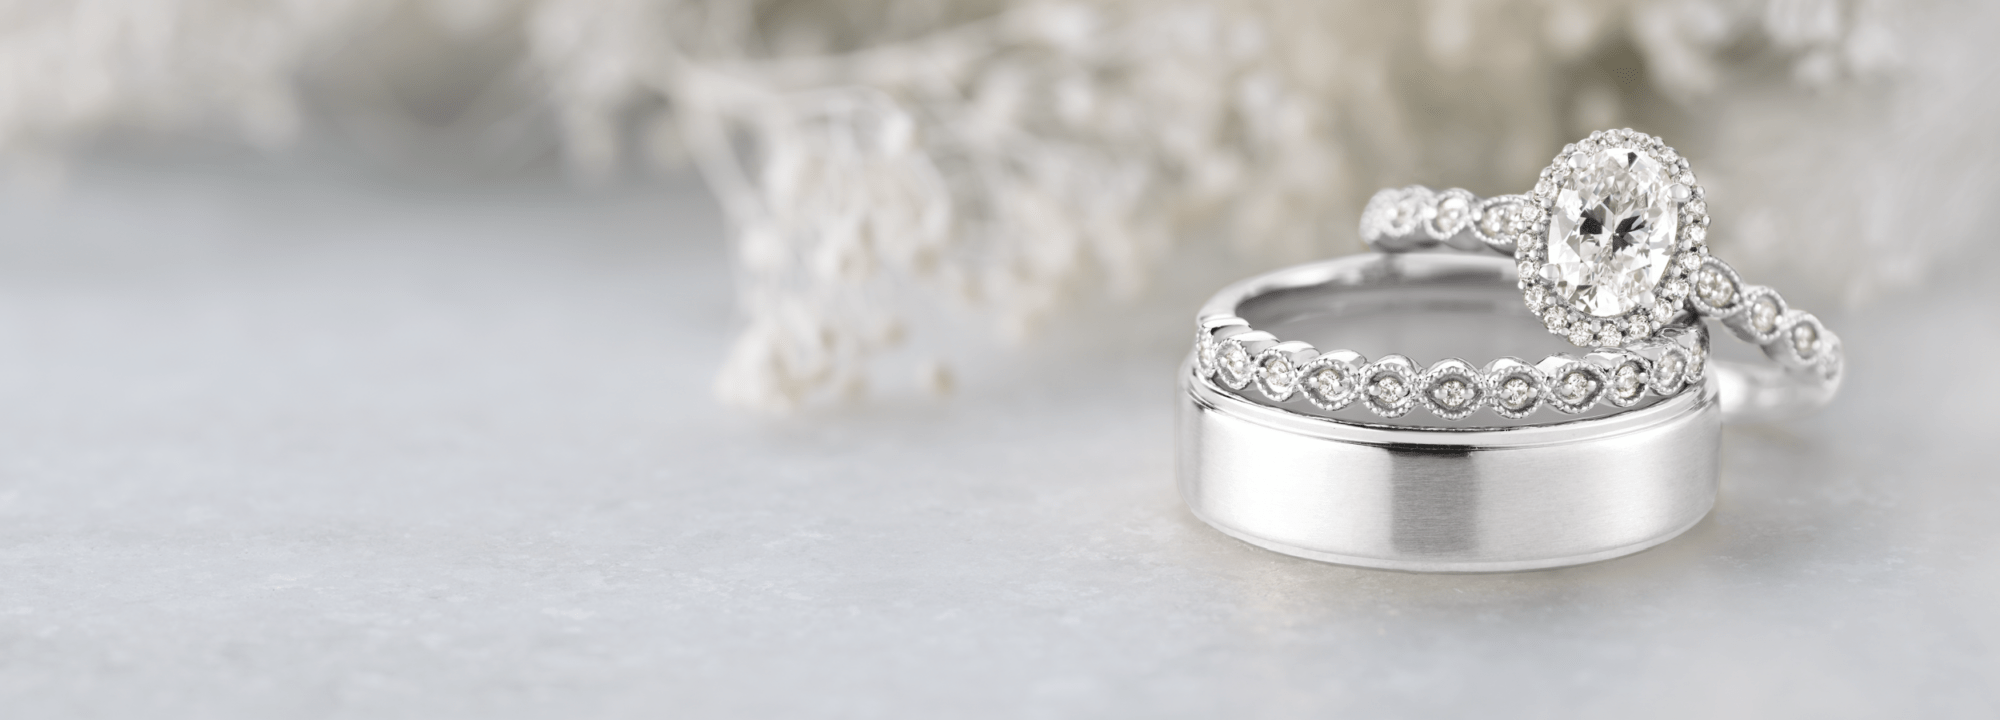 Ethically sourced engagement ring and wedding band sitting on the right of a decorated scene and table.